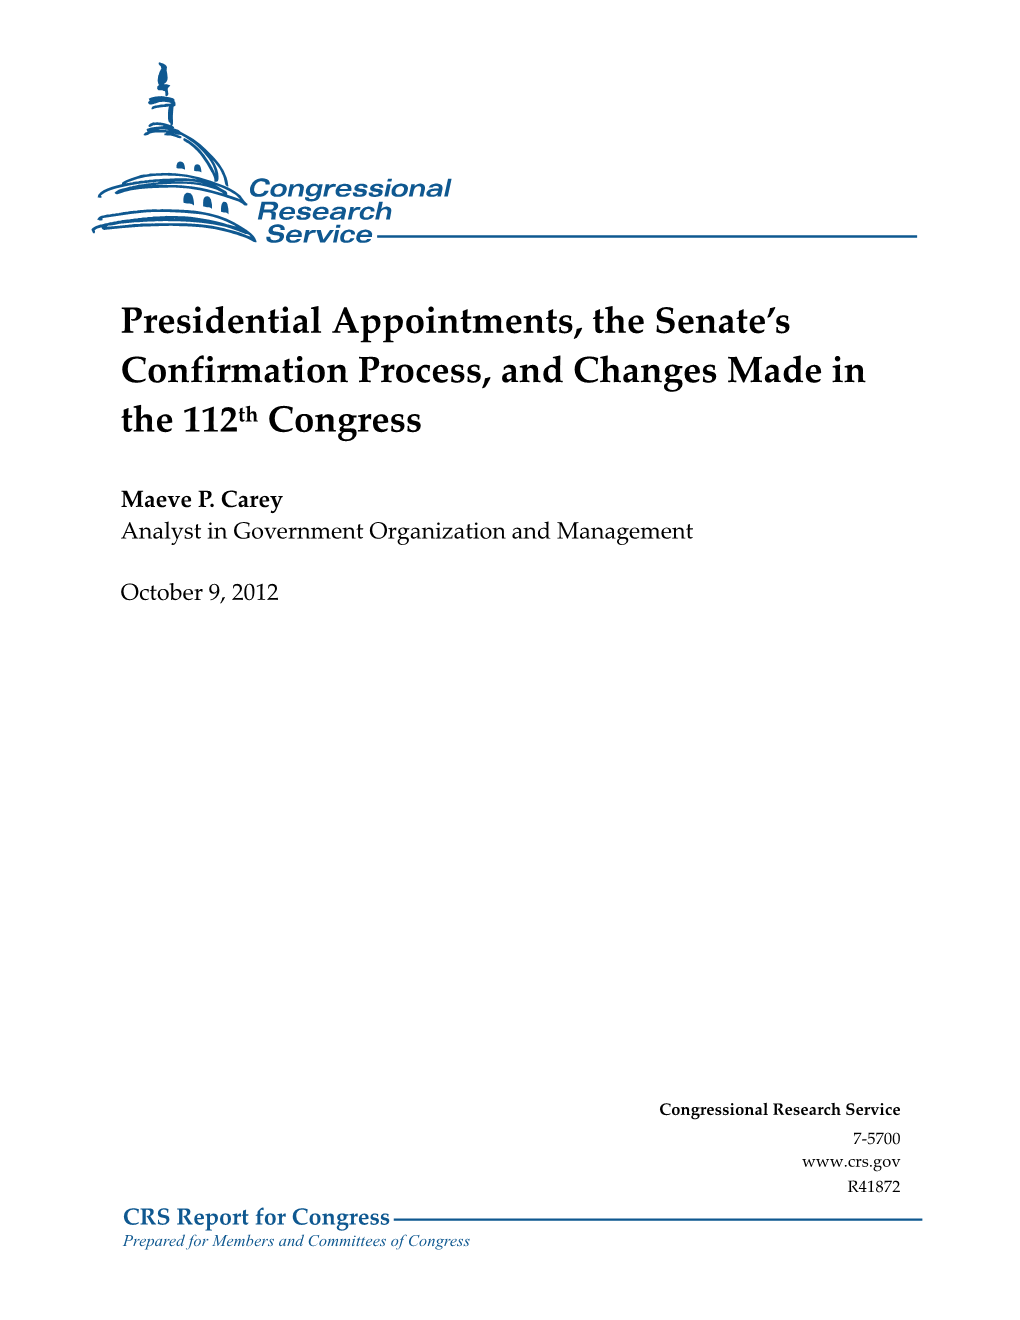 Presidential Appointments, the Senate's Confirmation Process, And